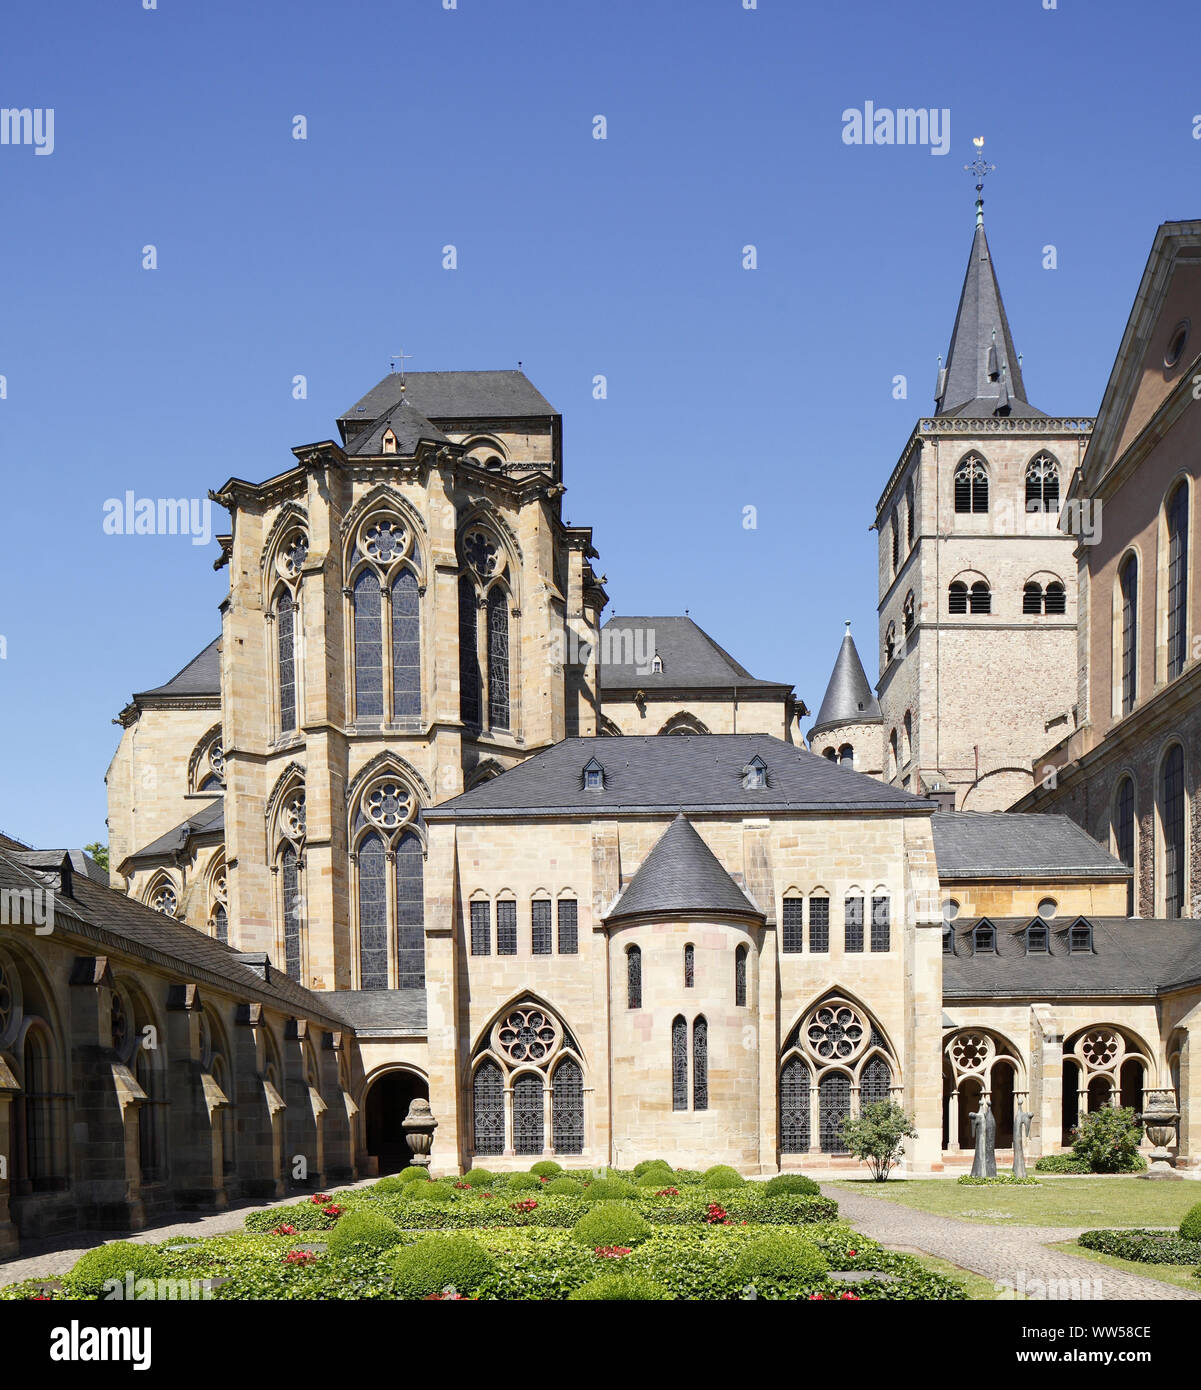 Church of Our Lady and Trier cathedral St. Peter seen from the cloister, Trier, Rhineland-Palatinate, Germany, Europe Stock Photo